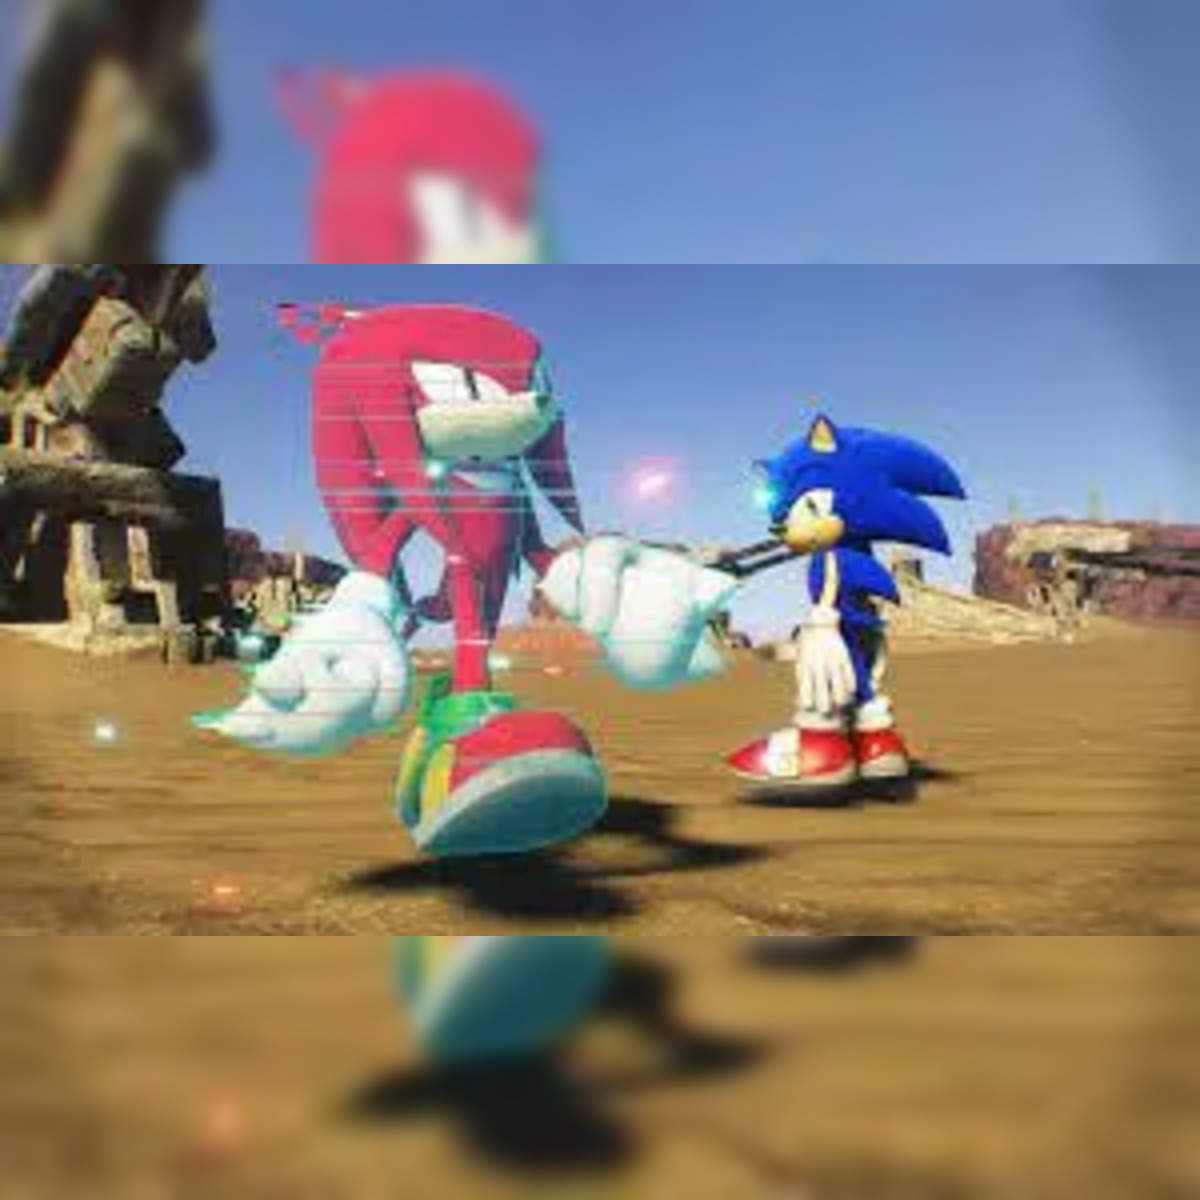 Sonic Frontiers: The Final Horizon has players stumbling over an